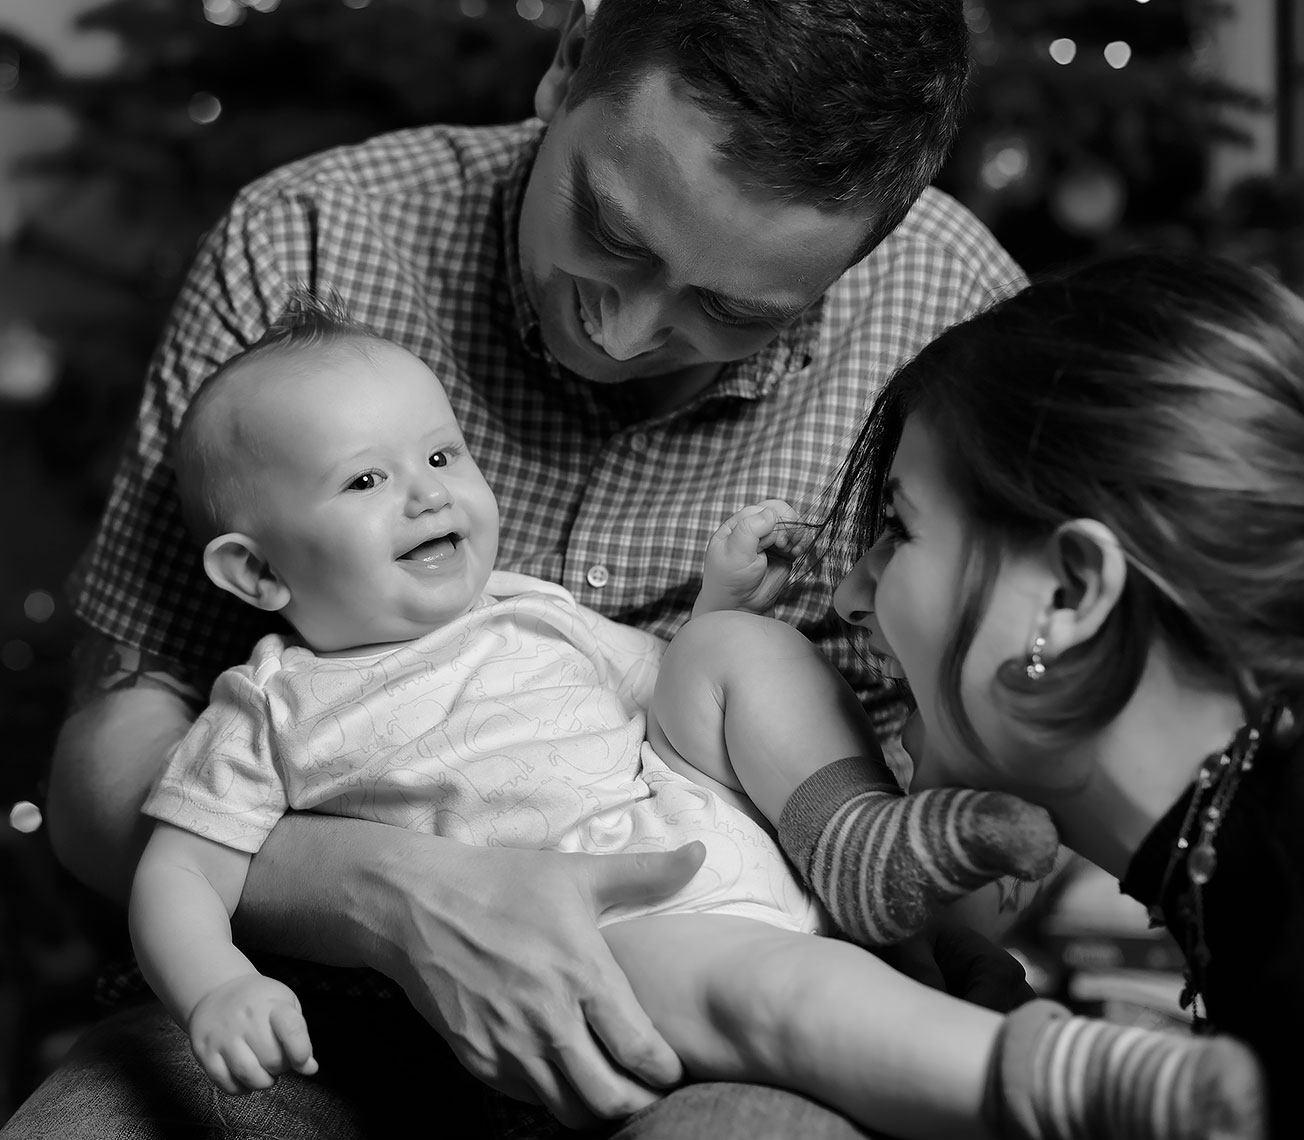 Young pretty woman with dark hair smiling at laughing baby being held by young man